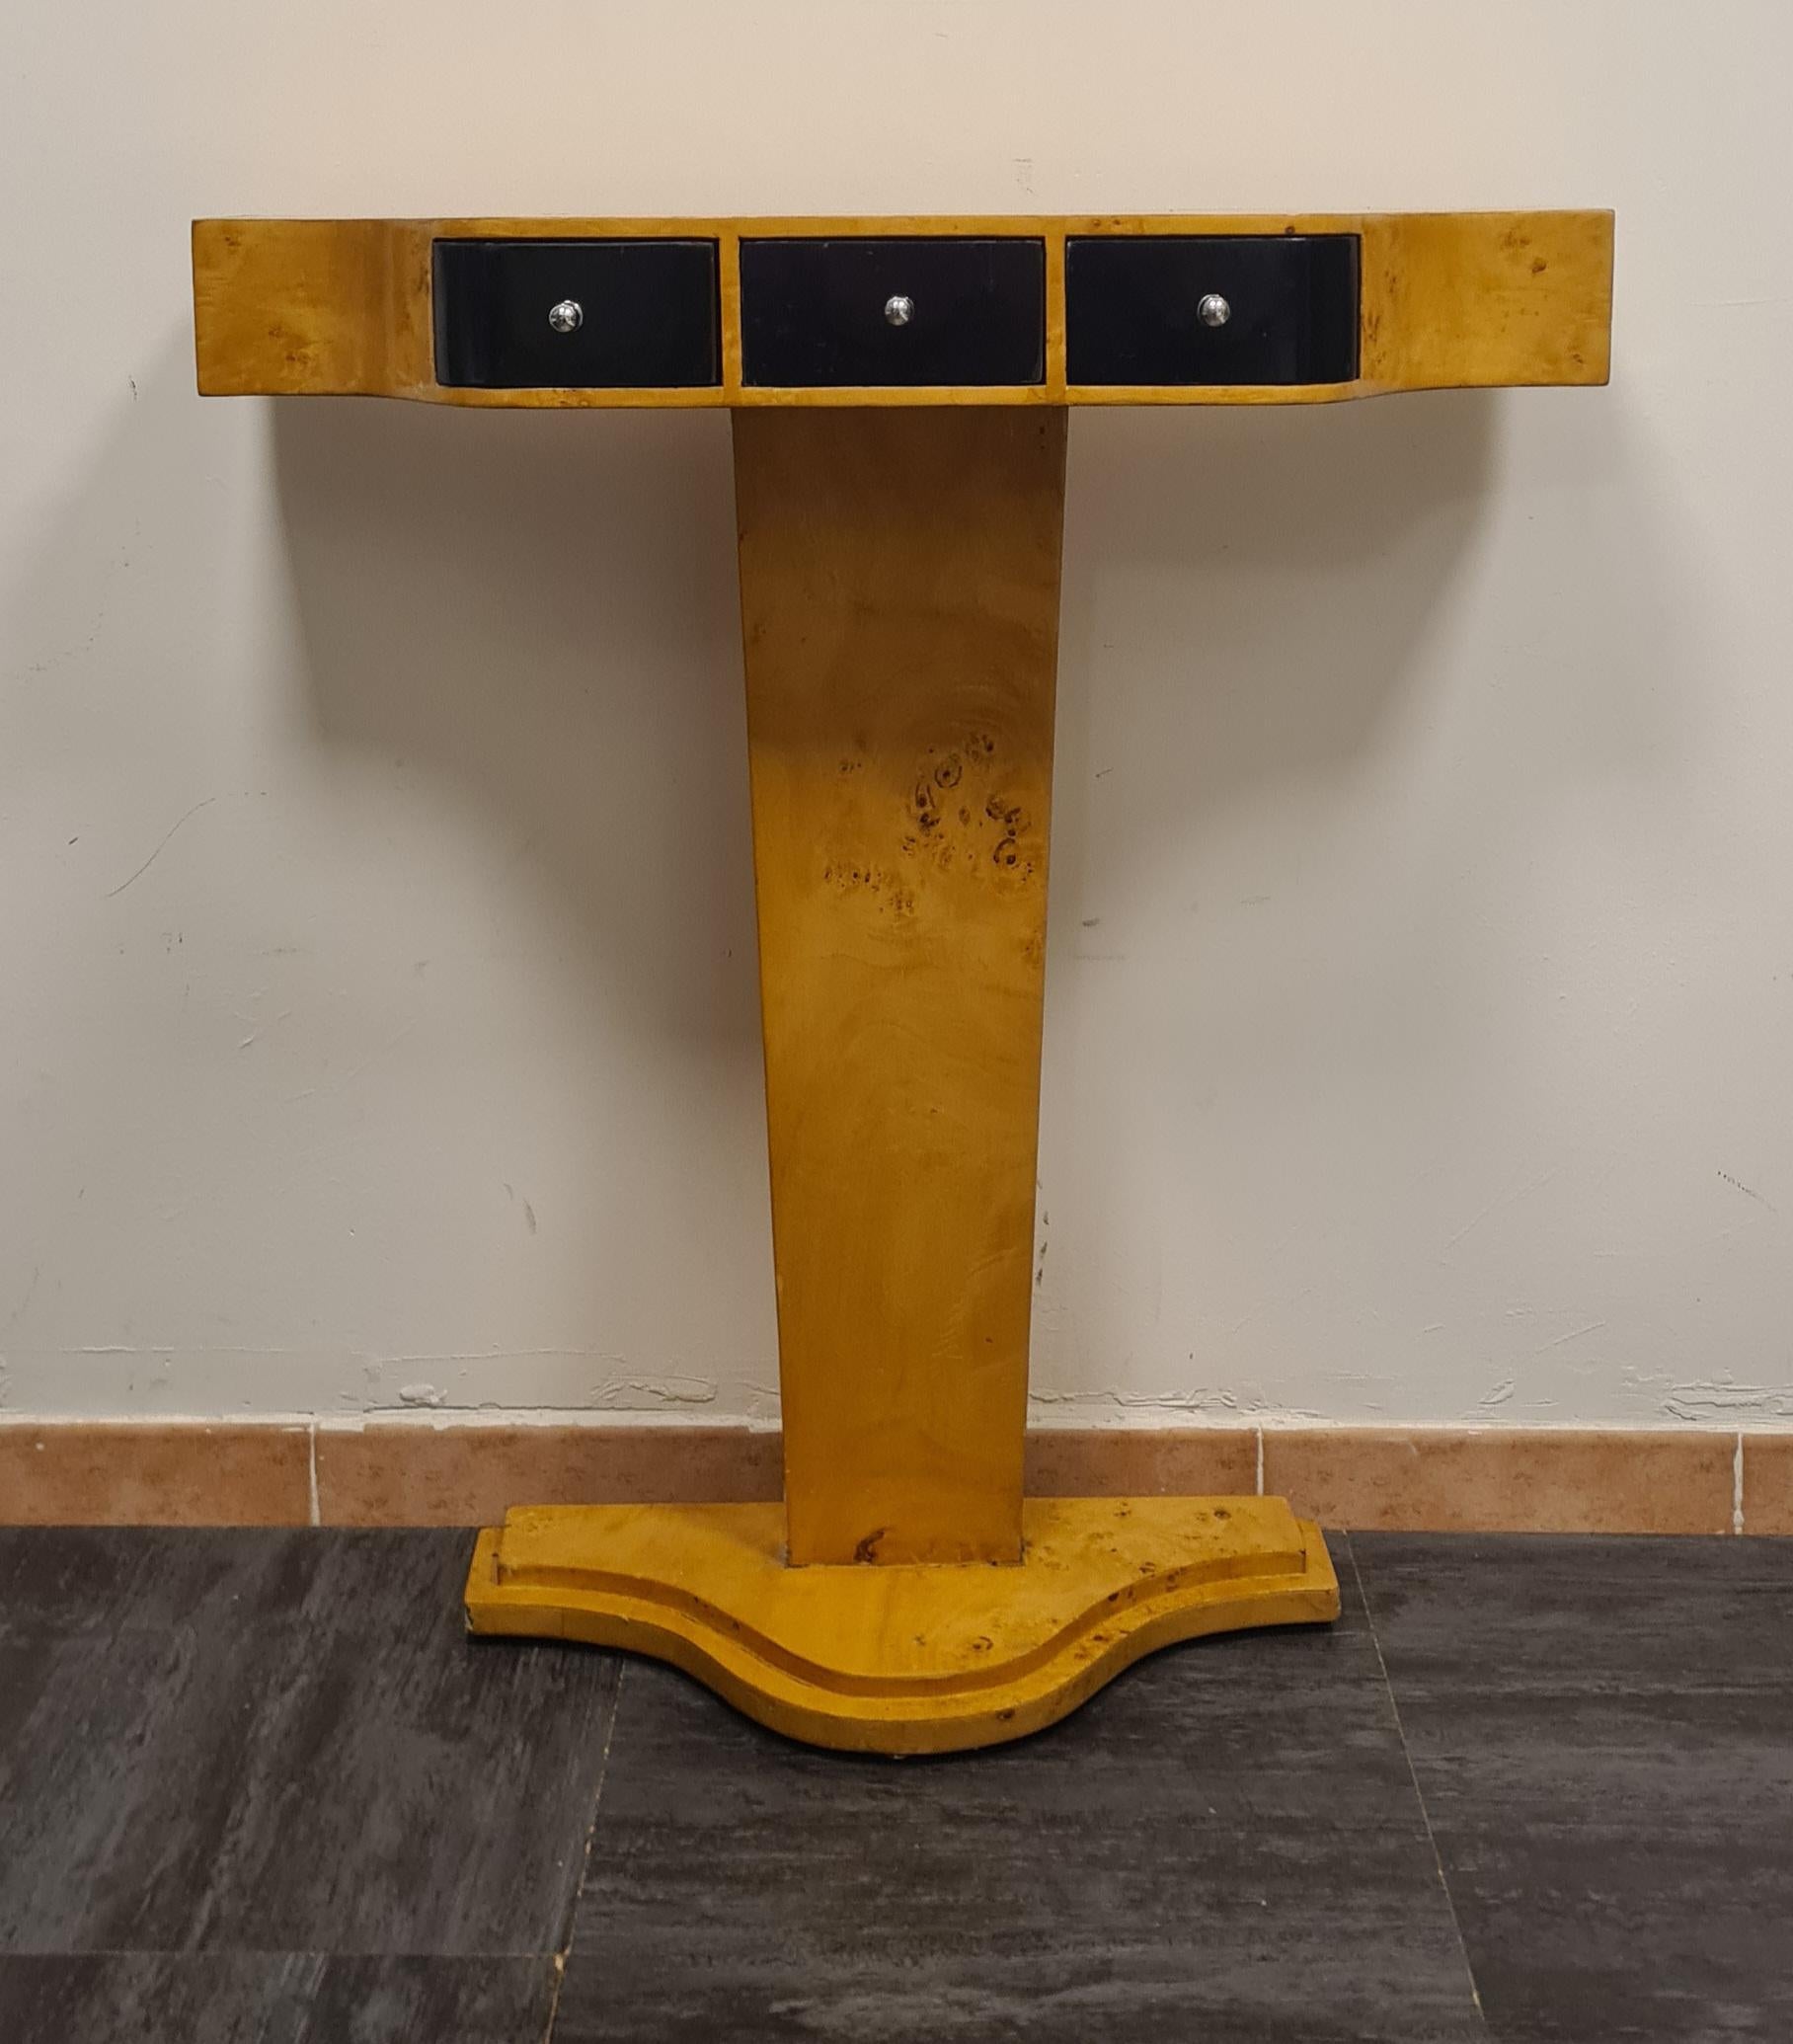 Art Deco style entryway or hallway console table

Small console table in Radica with three black lacquered drawers.

Refined and understated this wall console table is ideal for decorating your entryway or a hallway.

In Art Deco style, it can be